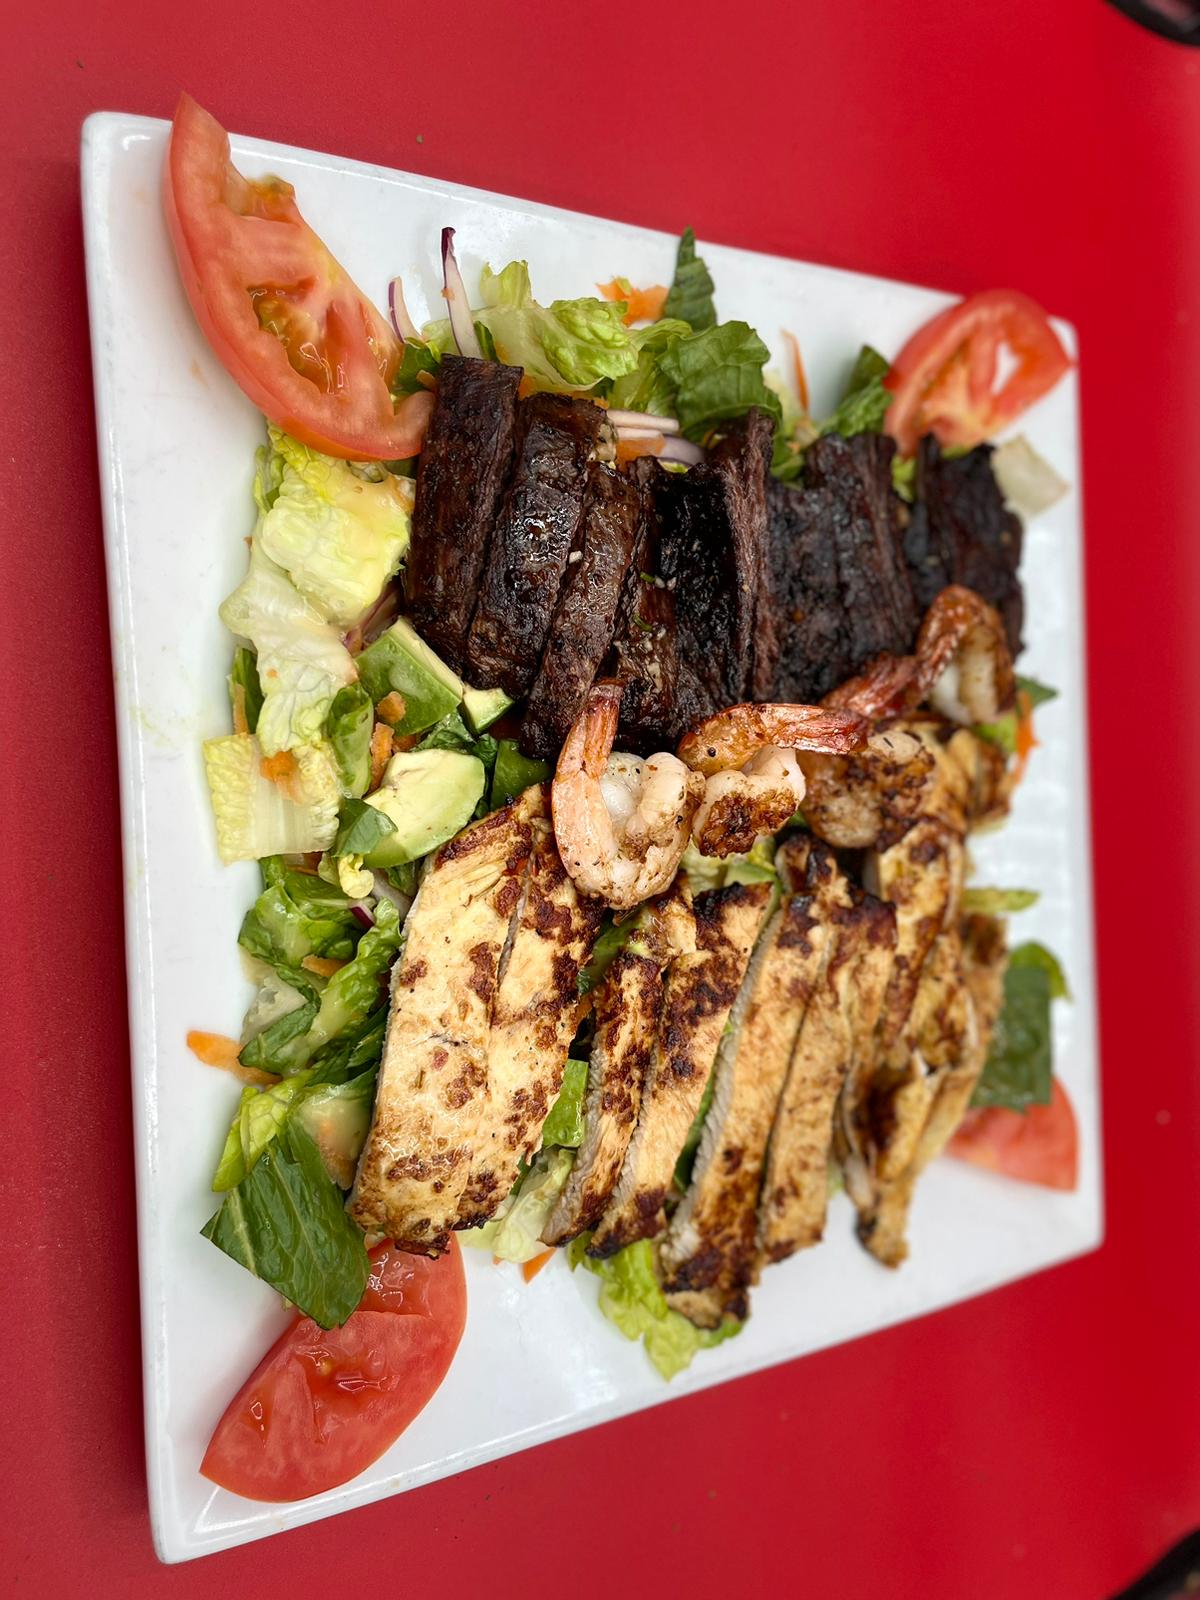 A plate of grilled meat and salad on a red plate.